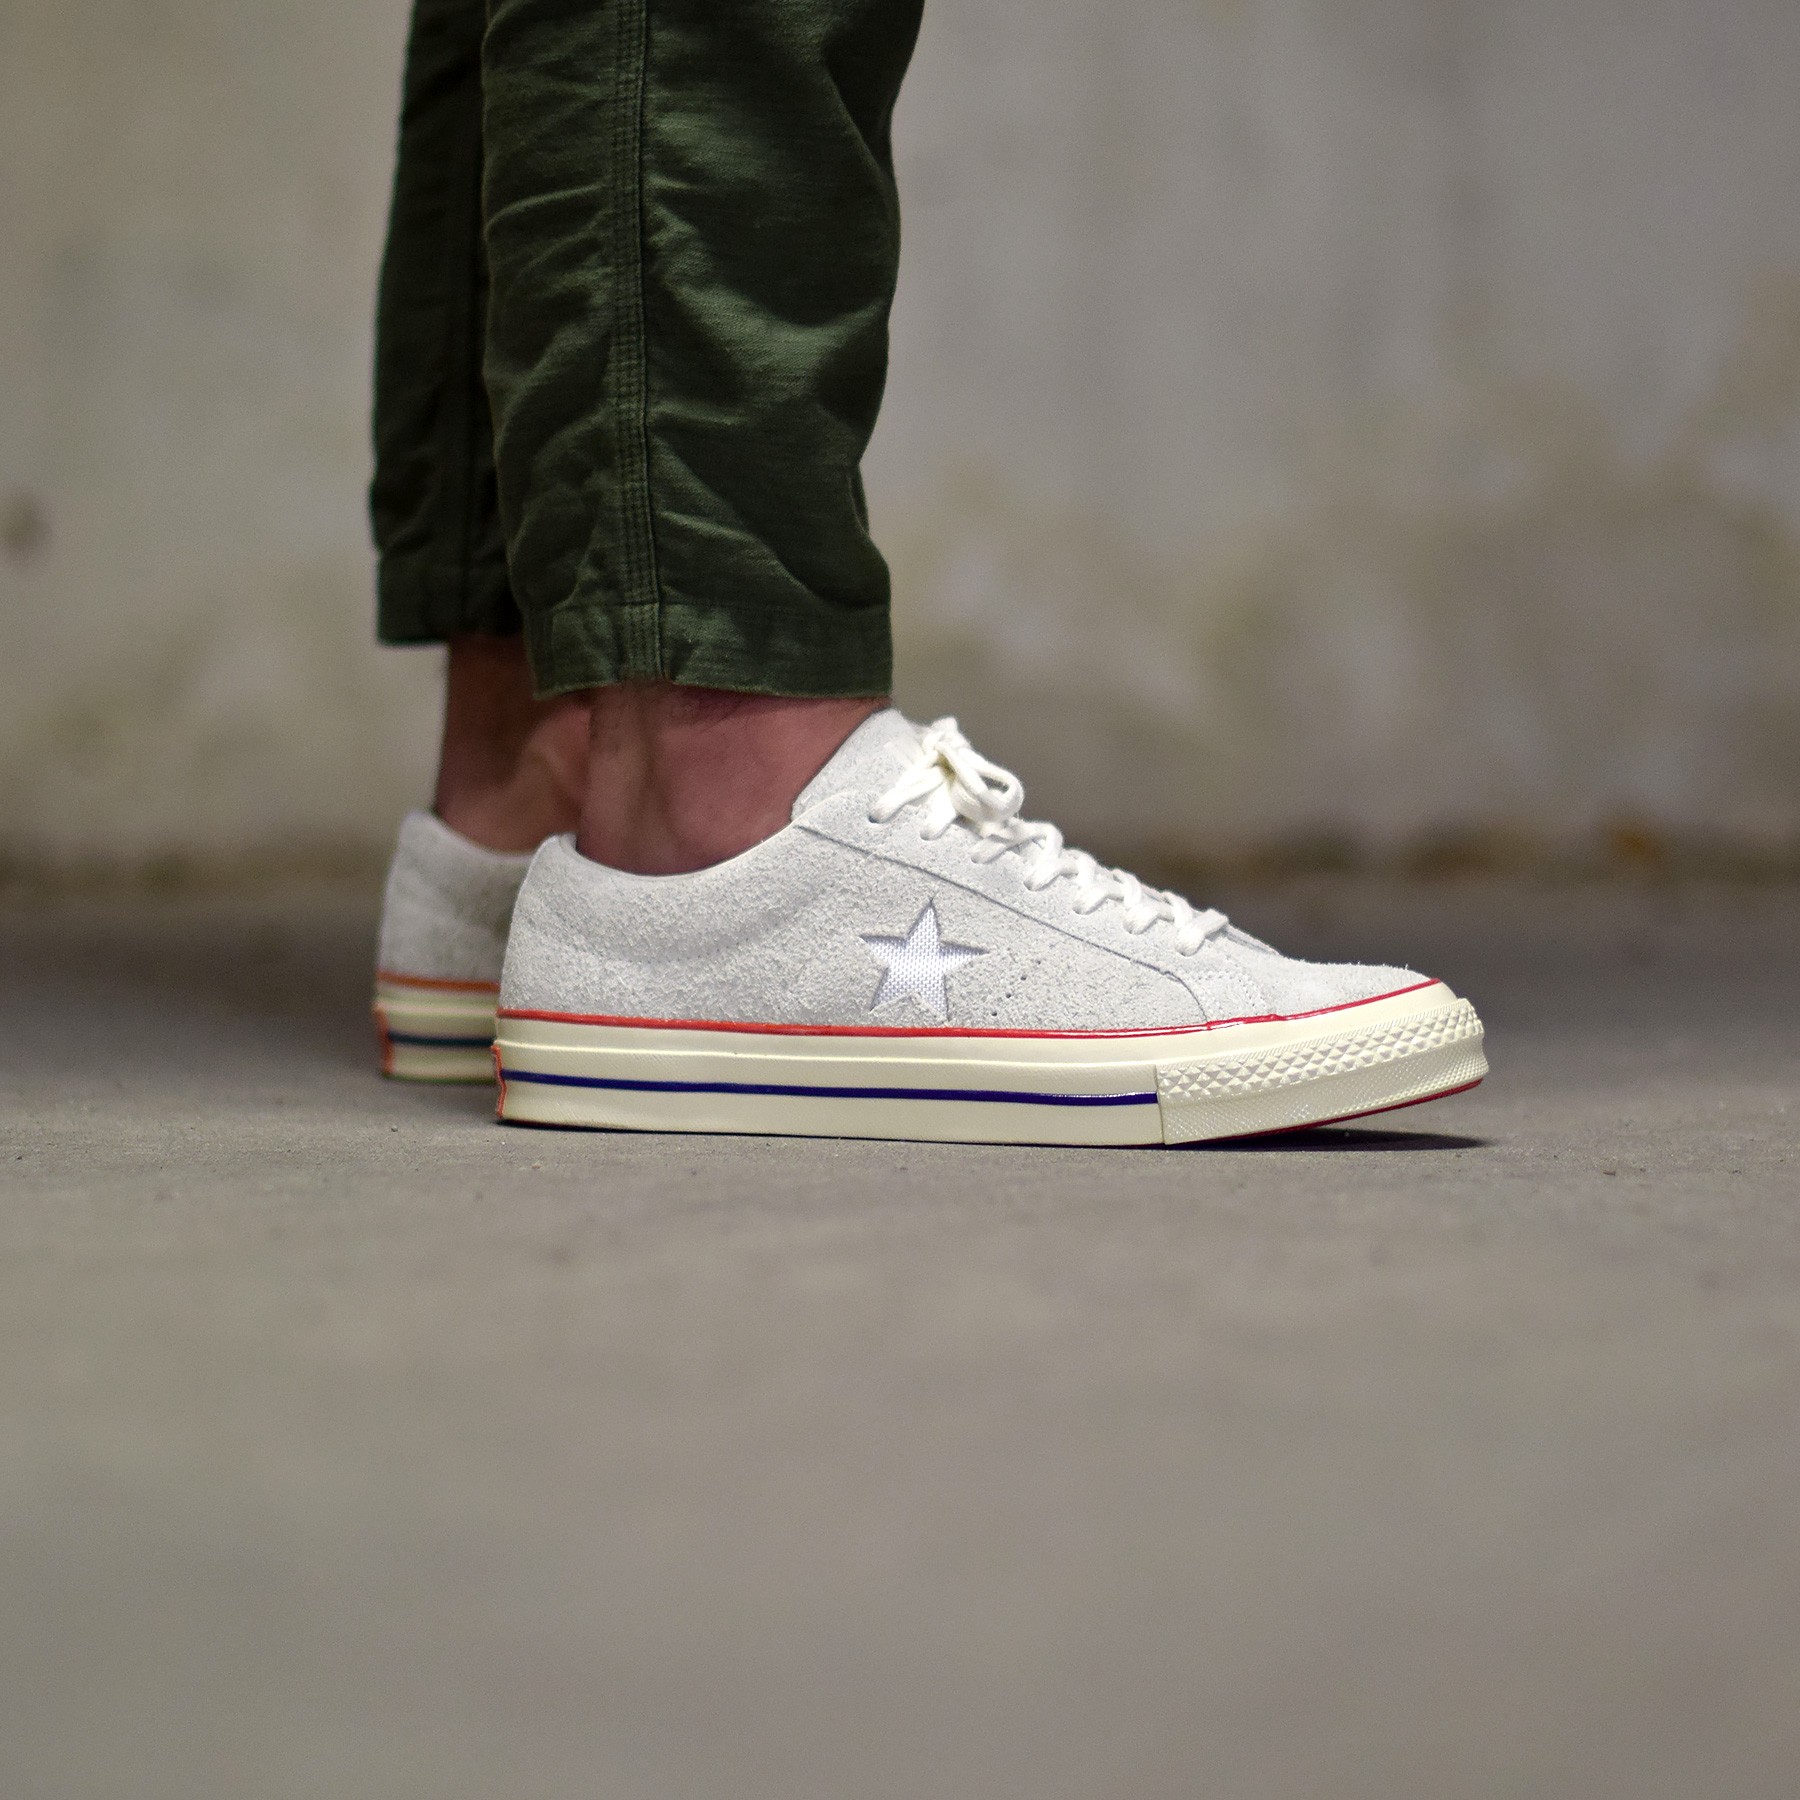 converse one star toile